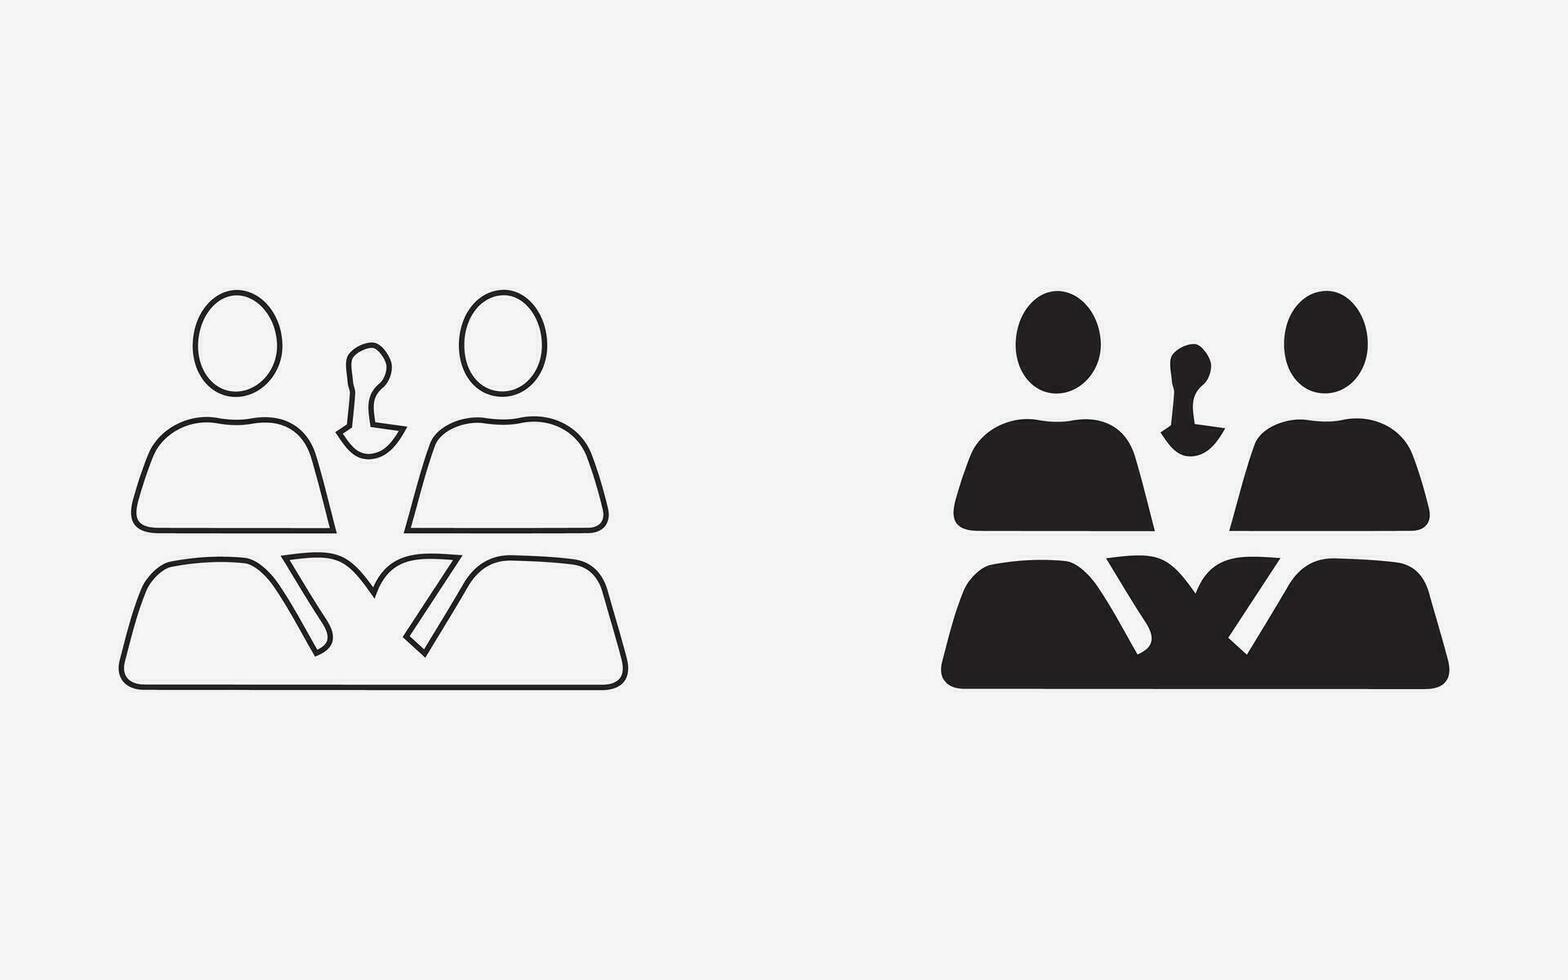 Pixel-perfect icons for meetings manager, organizer, business vector